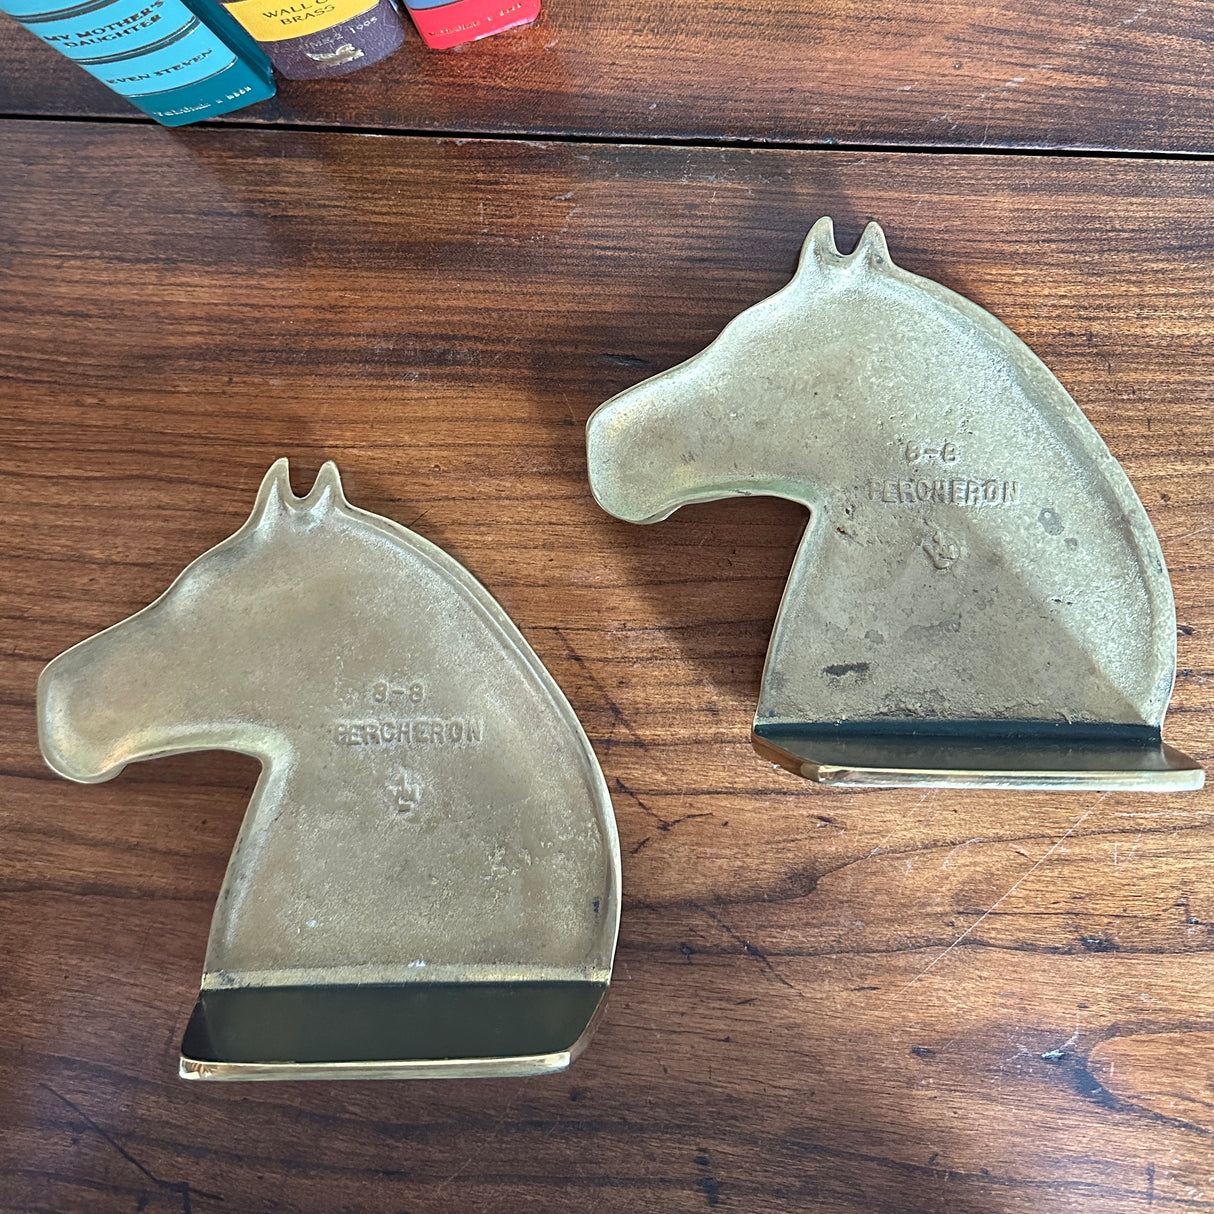 Brass Horse Bookends, Set of 2